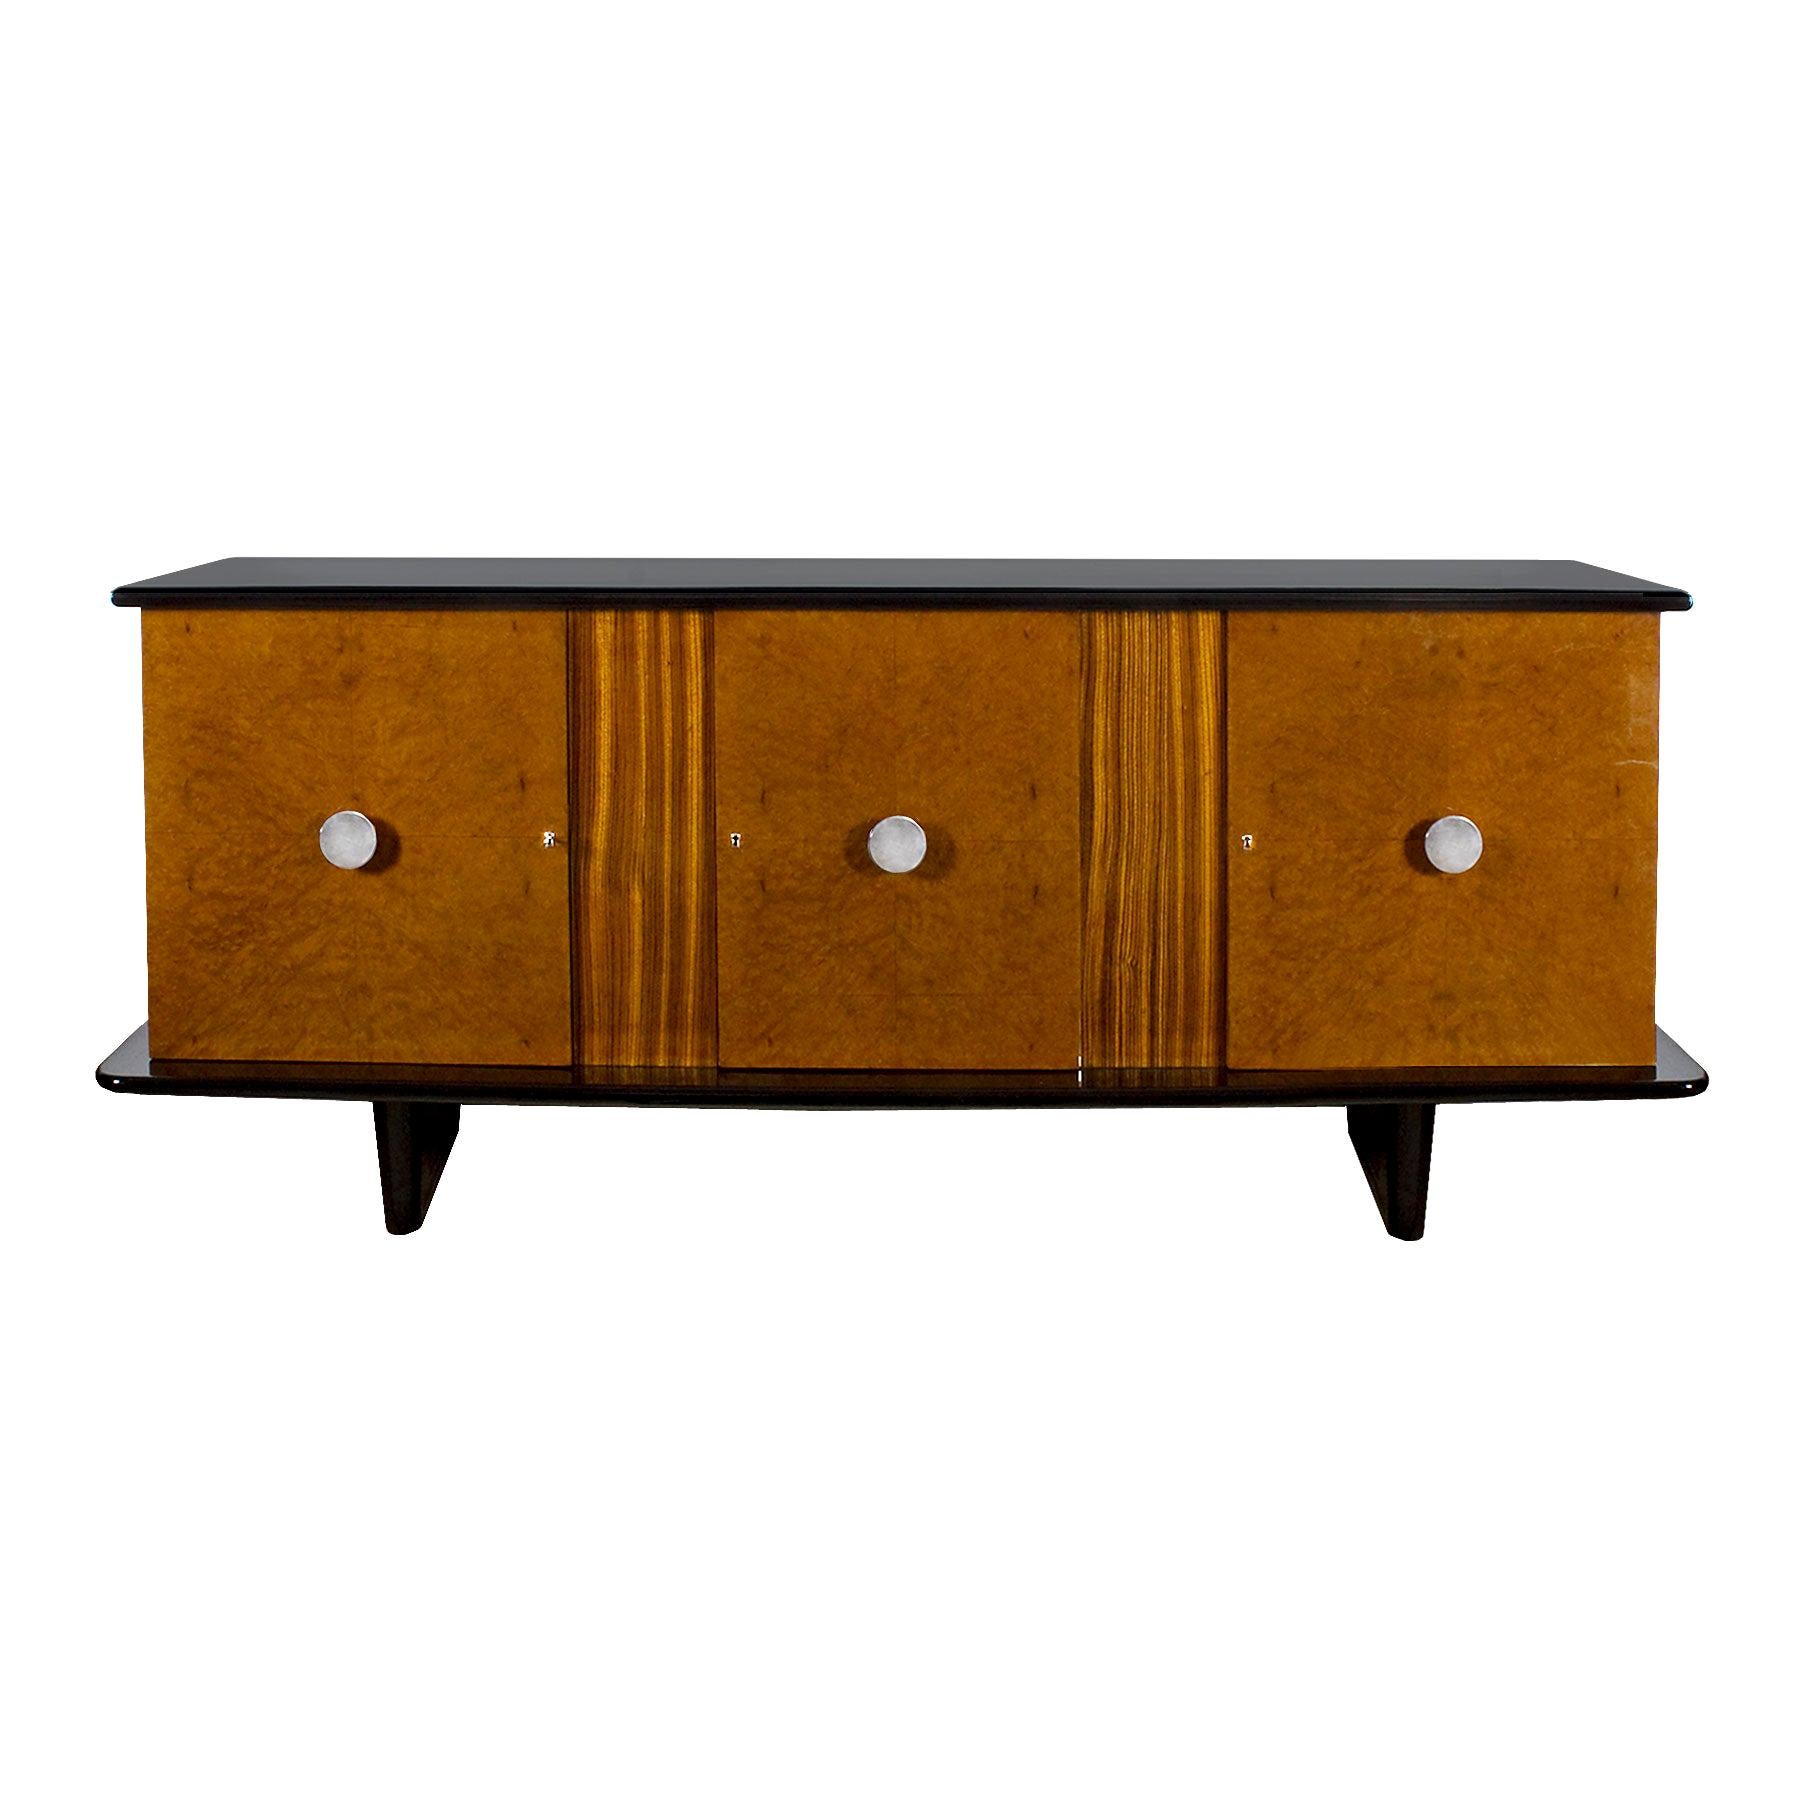 1930s Art Deco Sideboard, Maple, Zebrano, Cherrywood, Black Lacquer - Italy For Sale